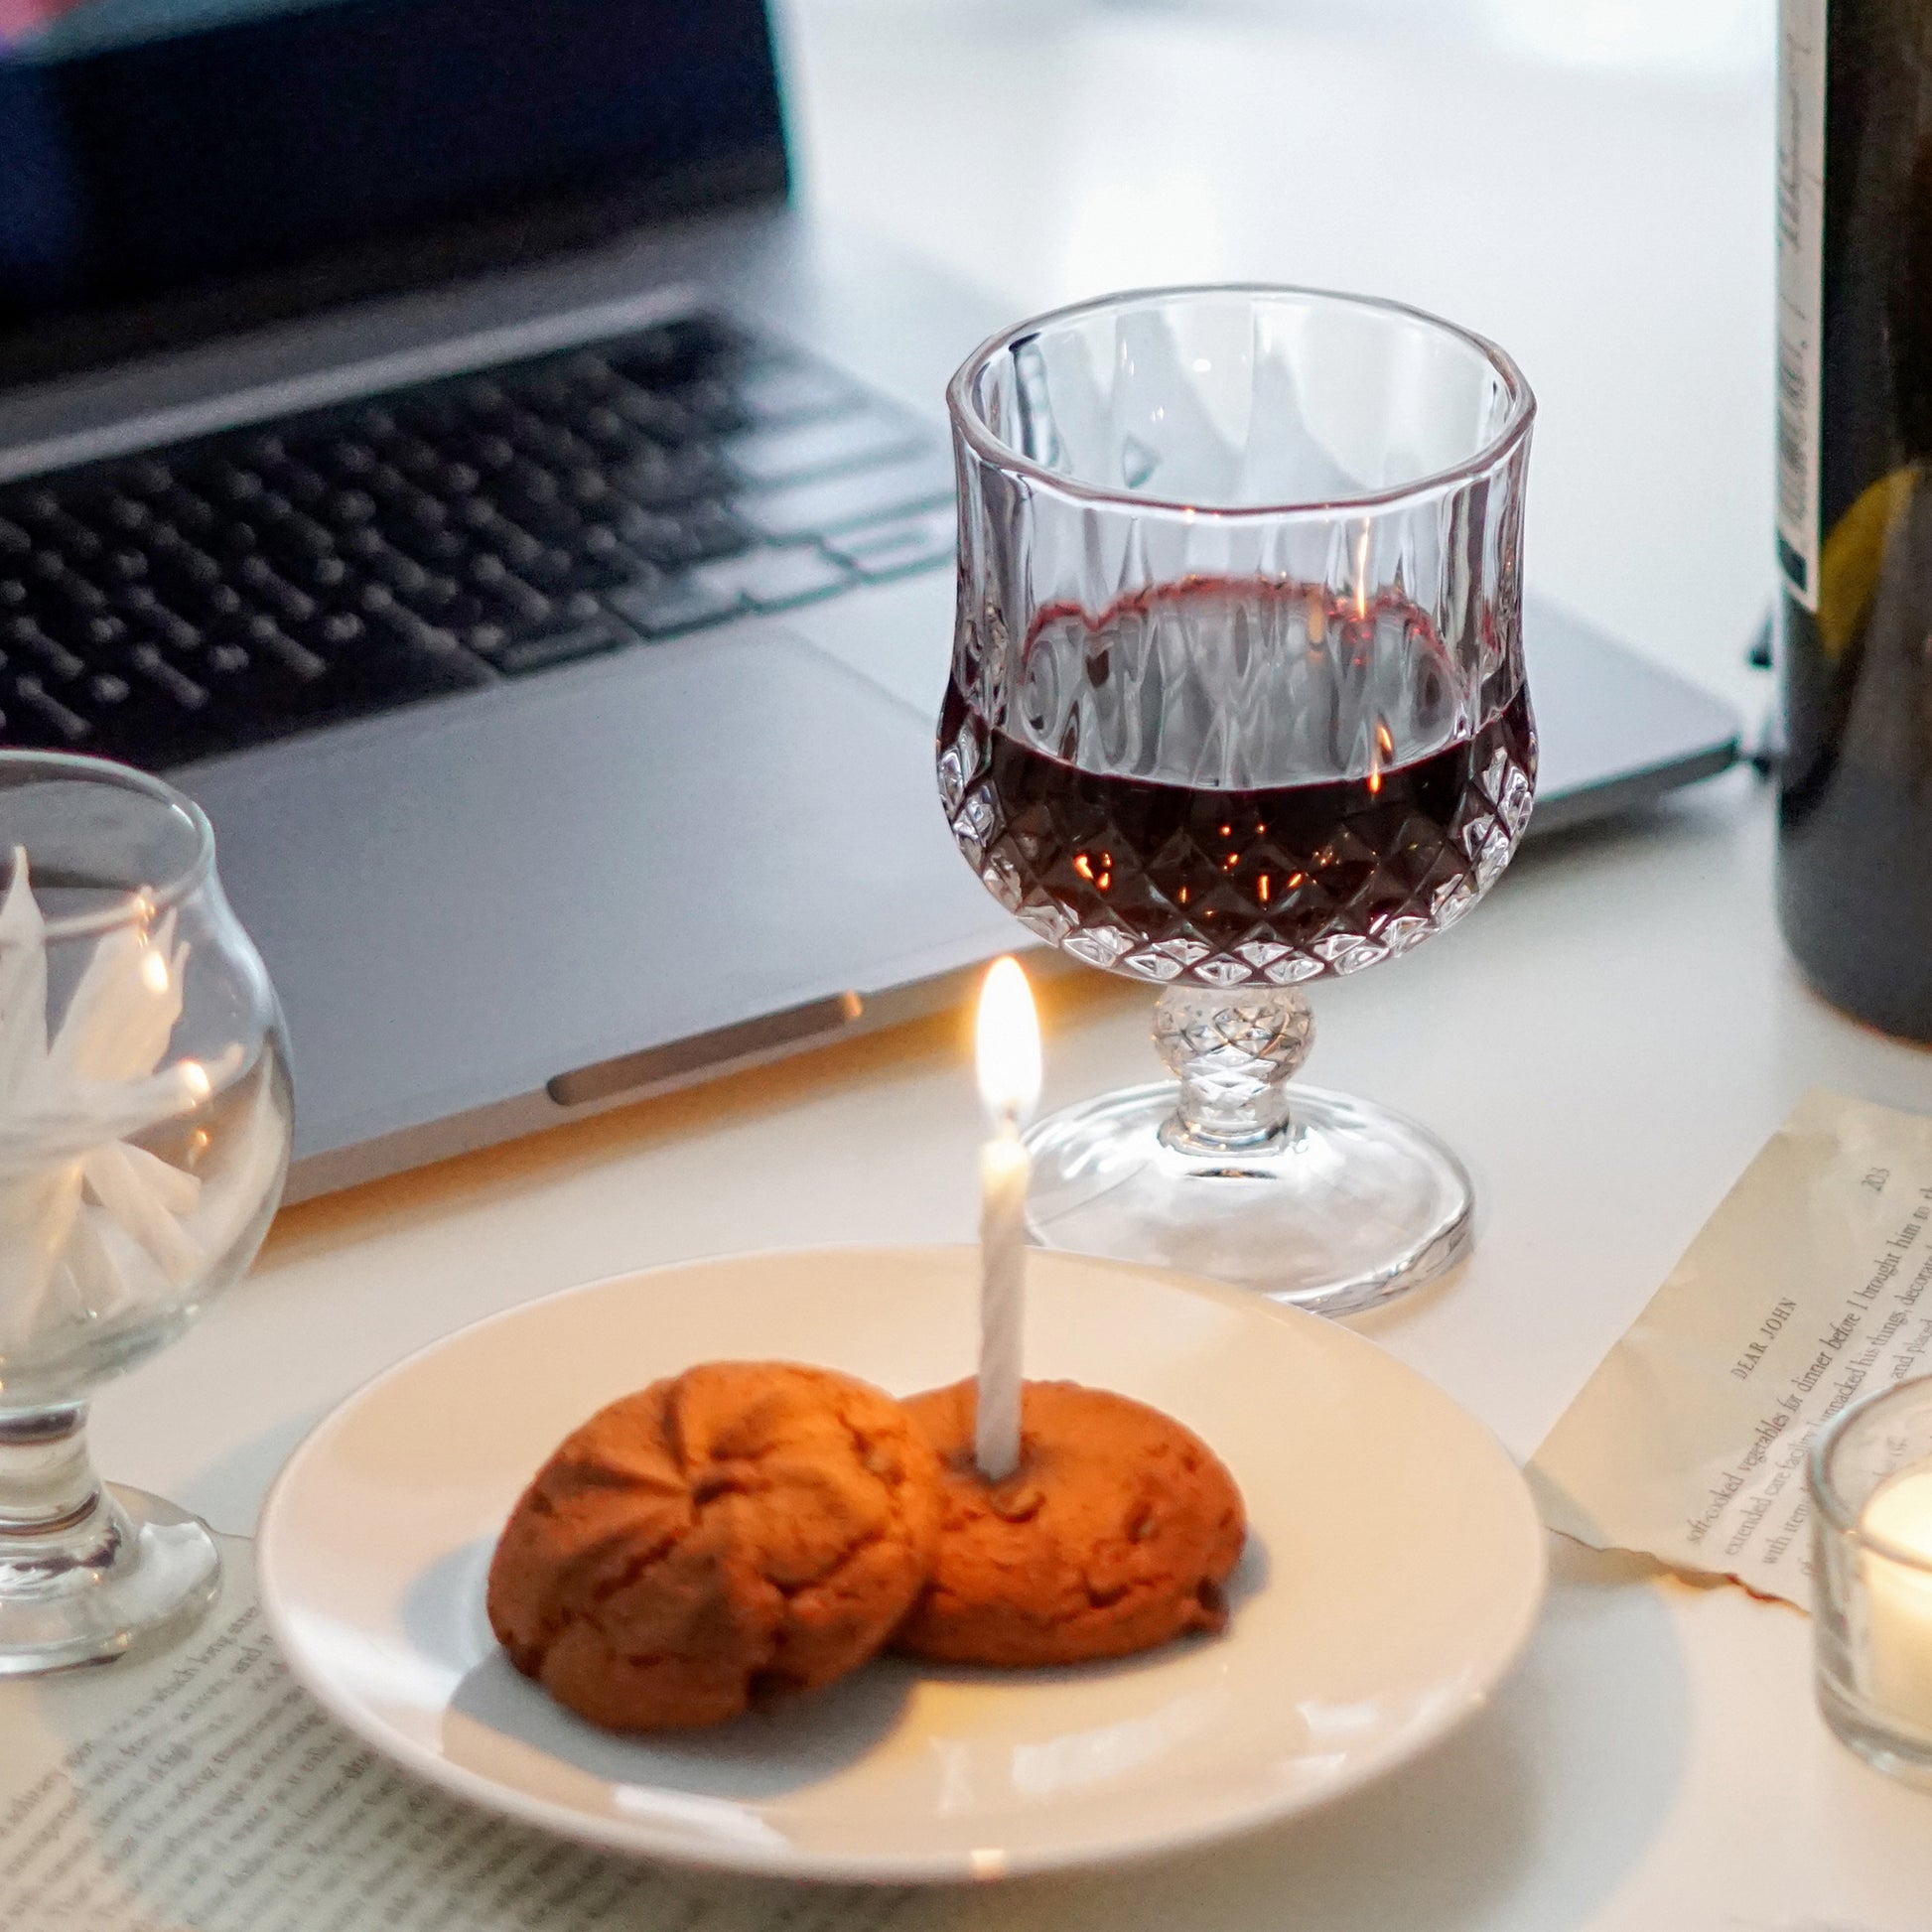 red wine in a mini wine glass, cookies on ceramic white dish, mini cake candles in a glass, a lit tealight candle in a glass candle holder, a bottle of wine, book pages, and macbook